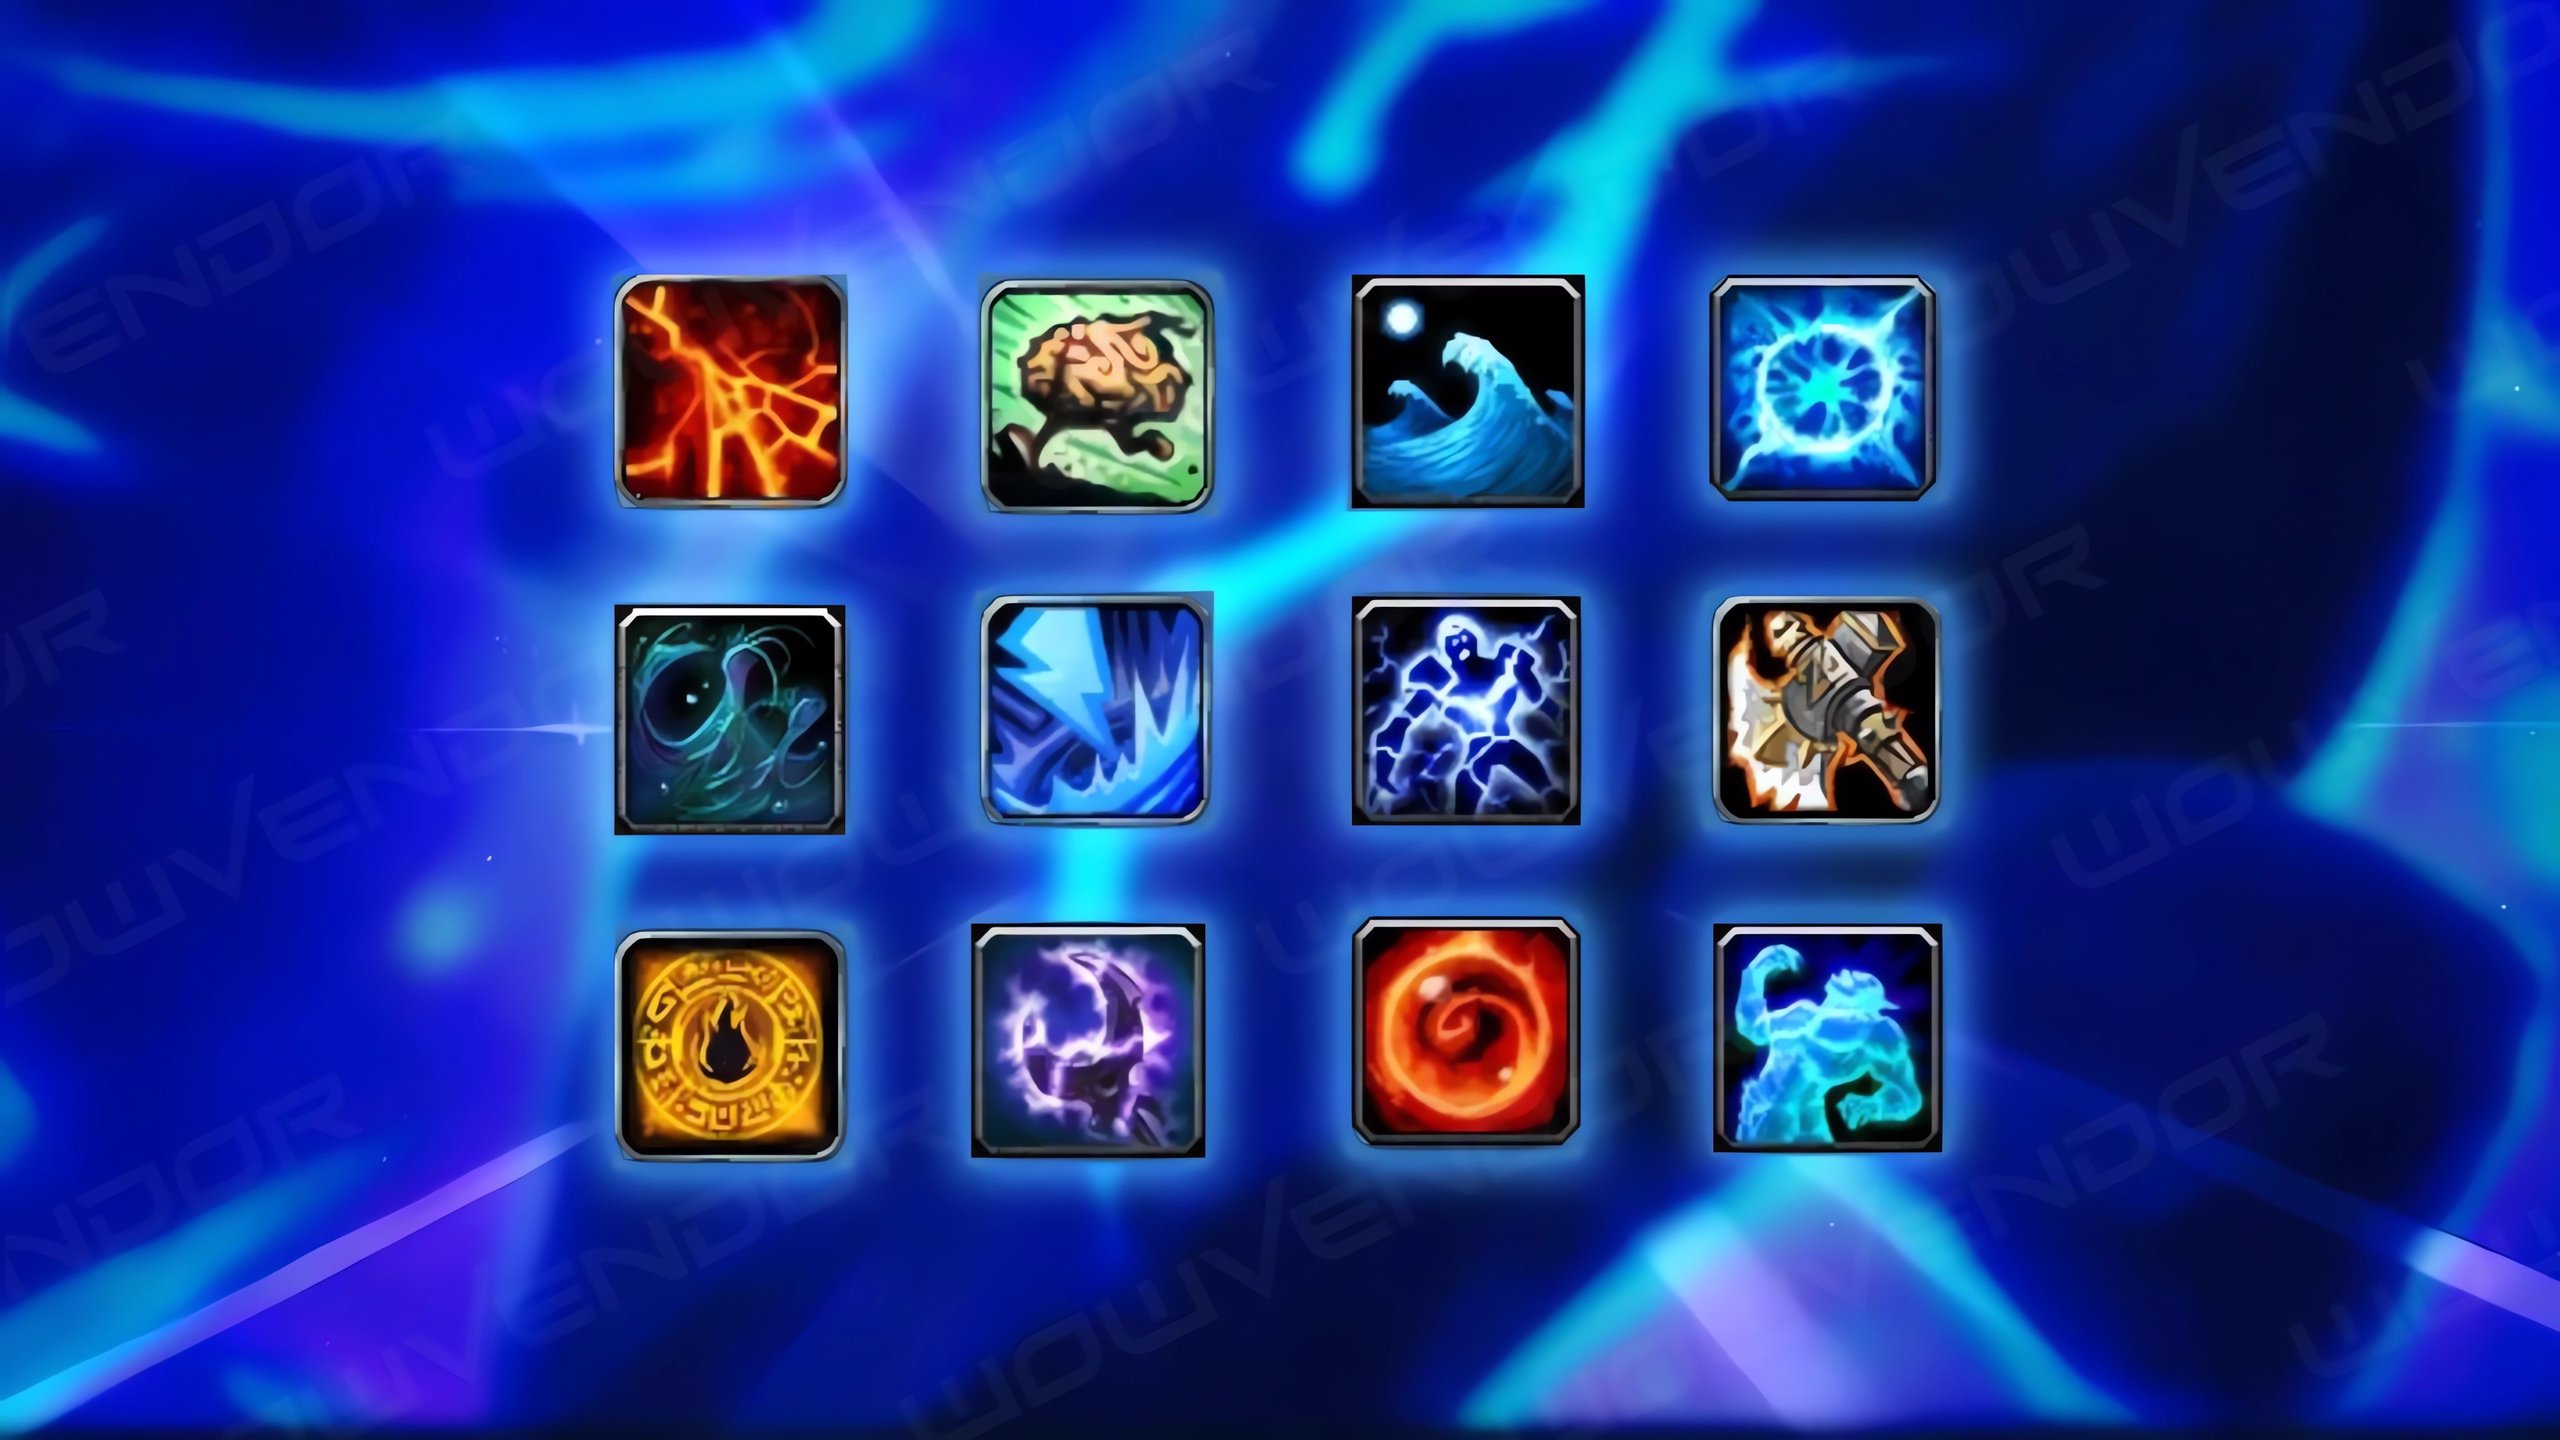 SoD Phase 3 Updated: All Shaman Runes and Locations